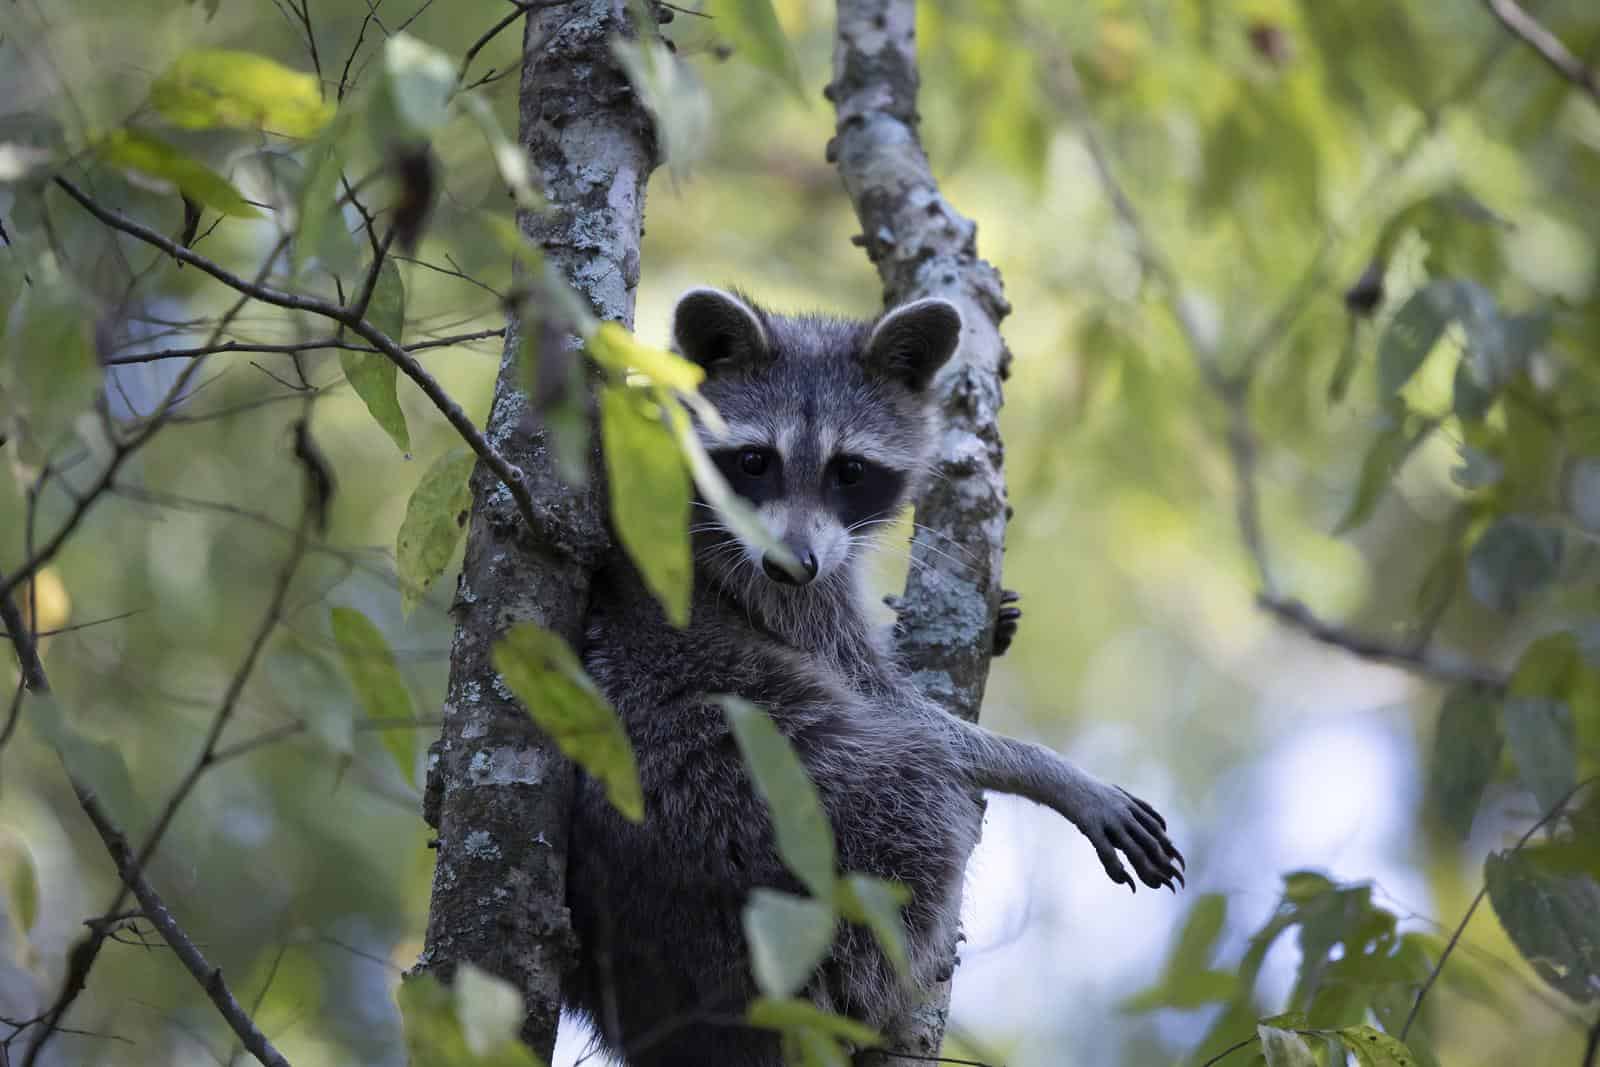 A curious raccoon looking out from behind a tree limb with an expressive eyes and alert posture.